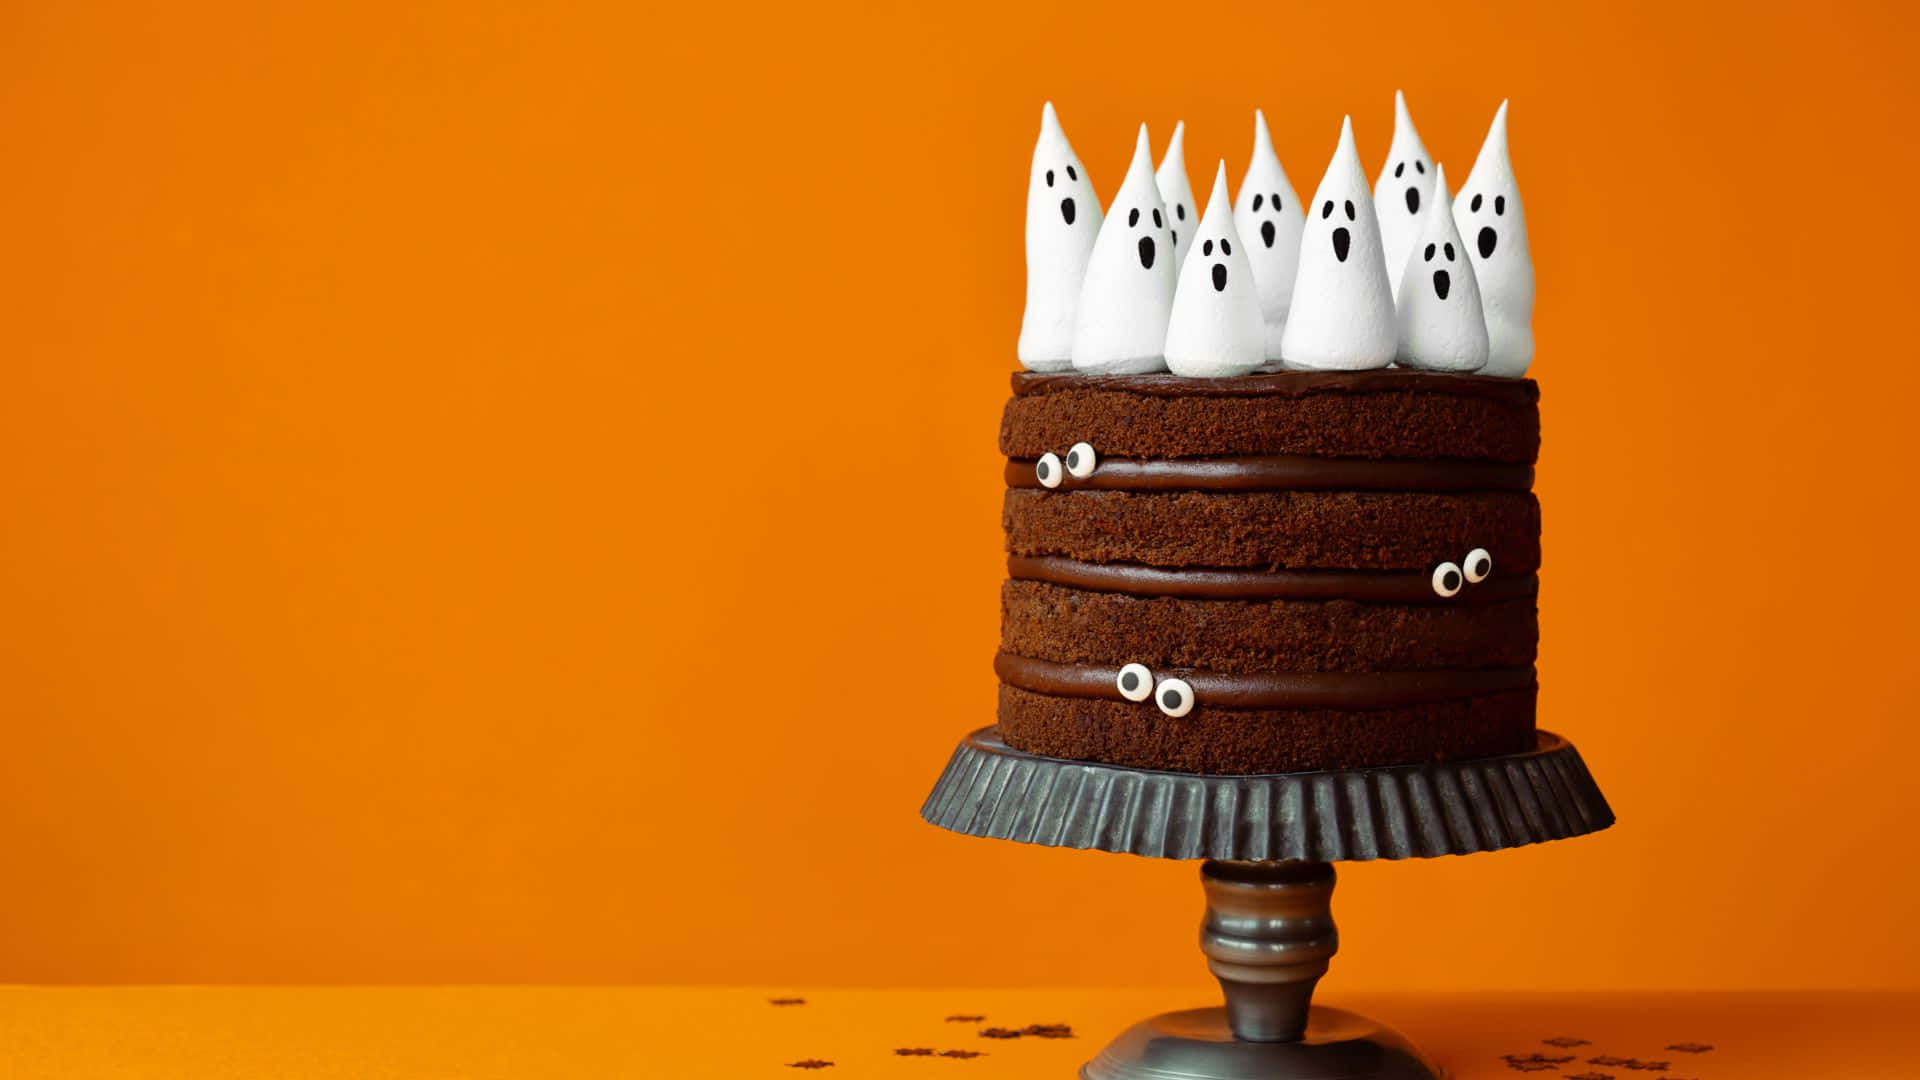 Get Into the Halloween Spirit with a Scary Themed Cake! Wallpaper